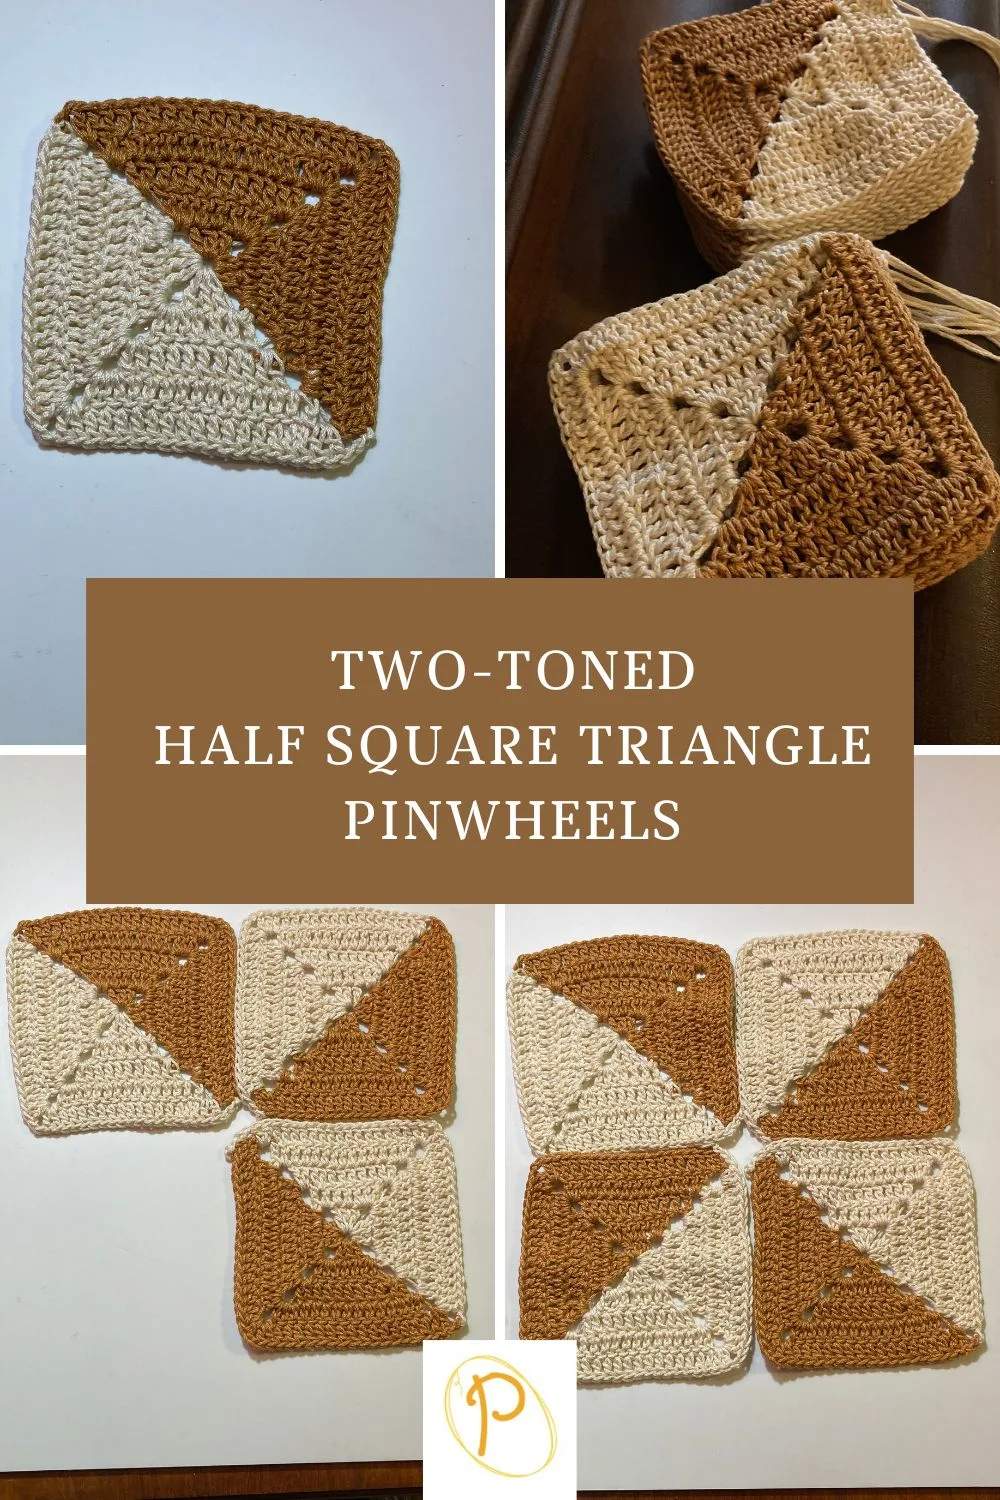 Two-Toned Half Square Triangle Pinwheels